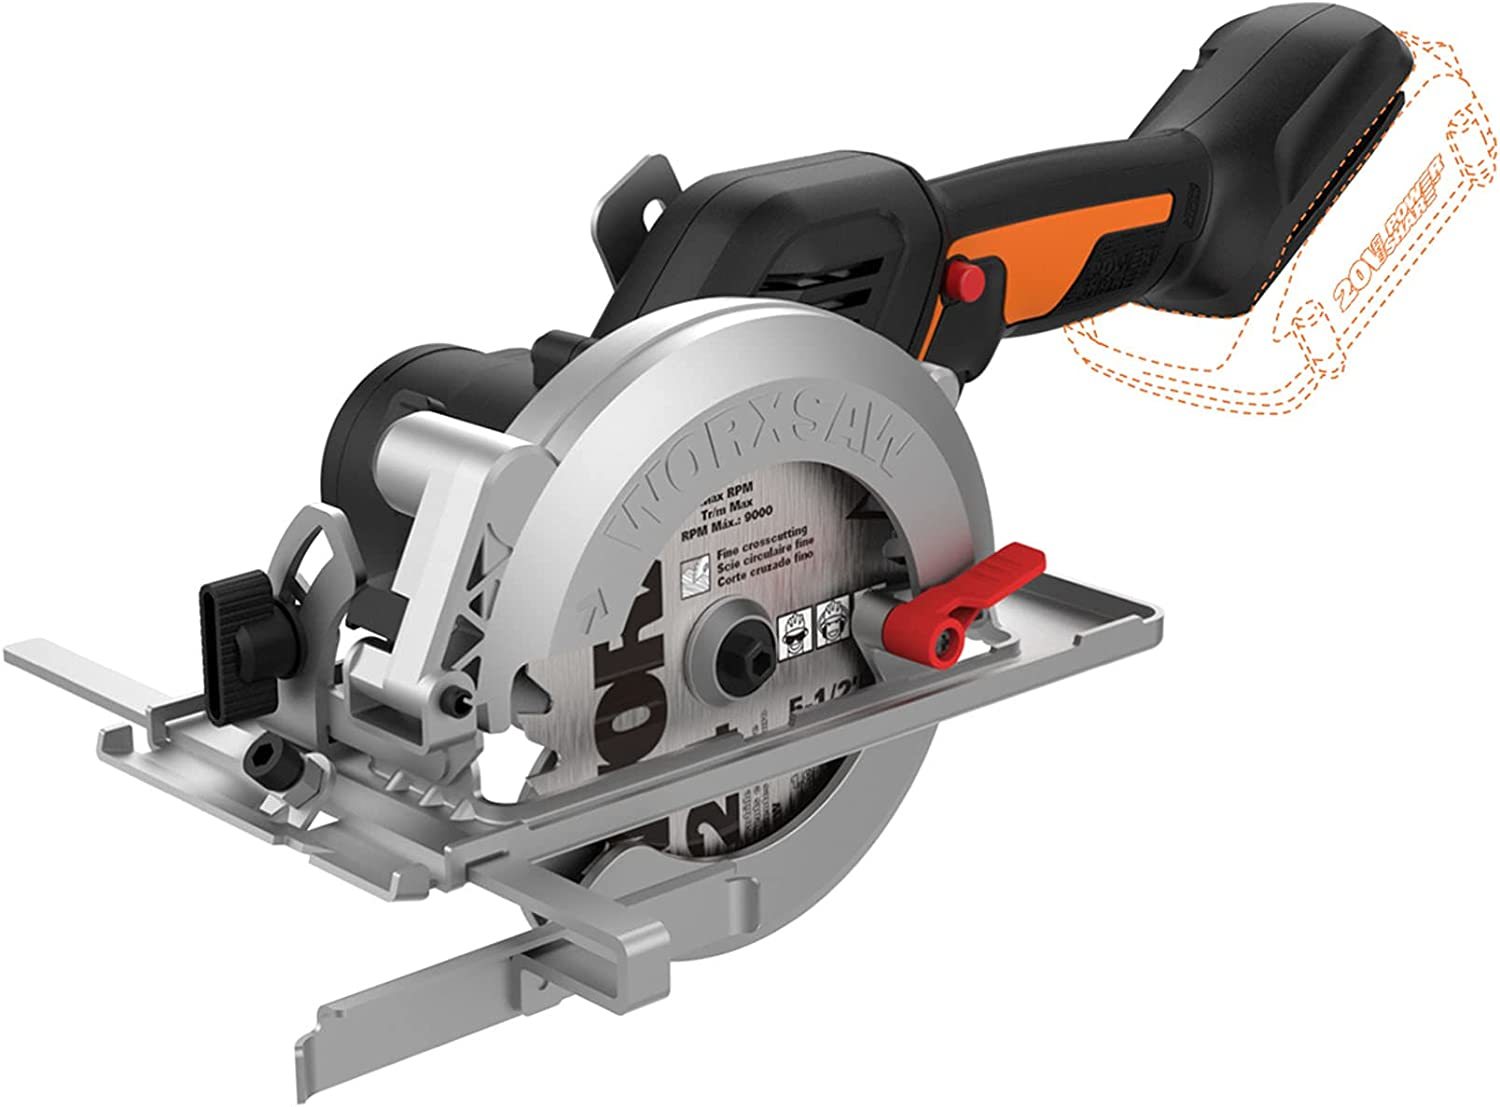 Worx WX531L.9 20V Power Share WORXSAW 4.5" Cordless Compact Circular, Tool Only - $120.99